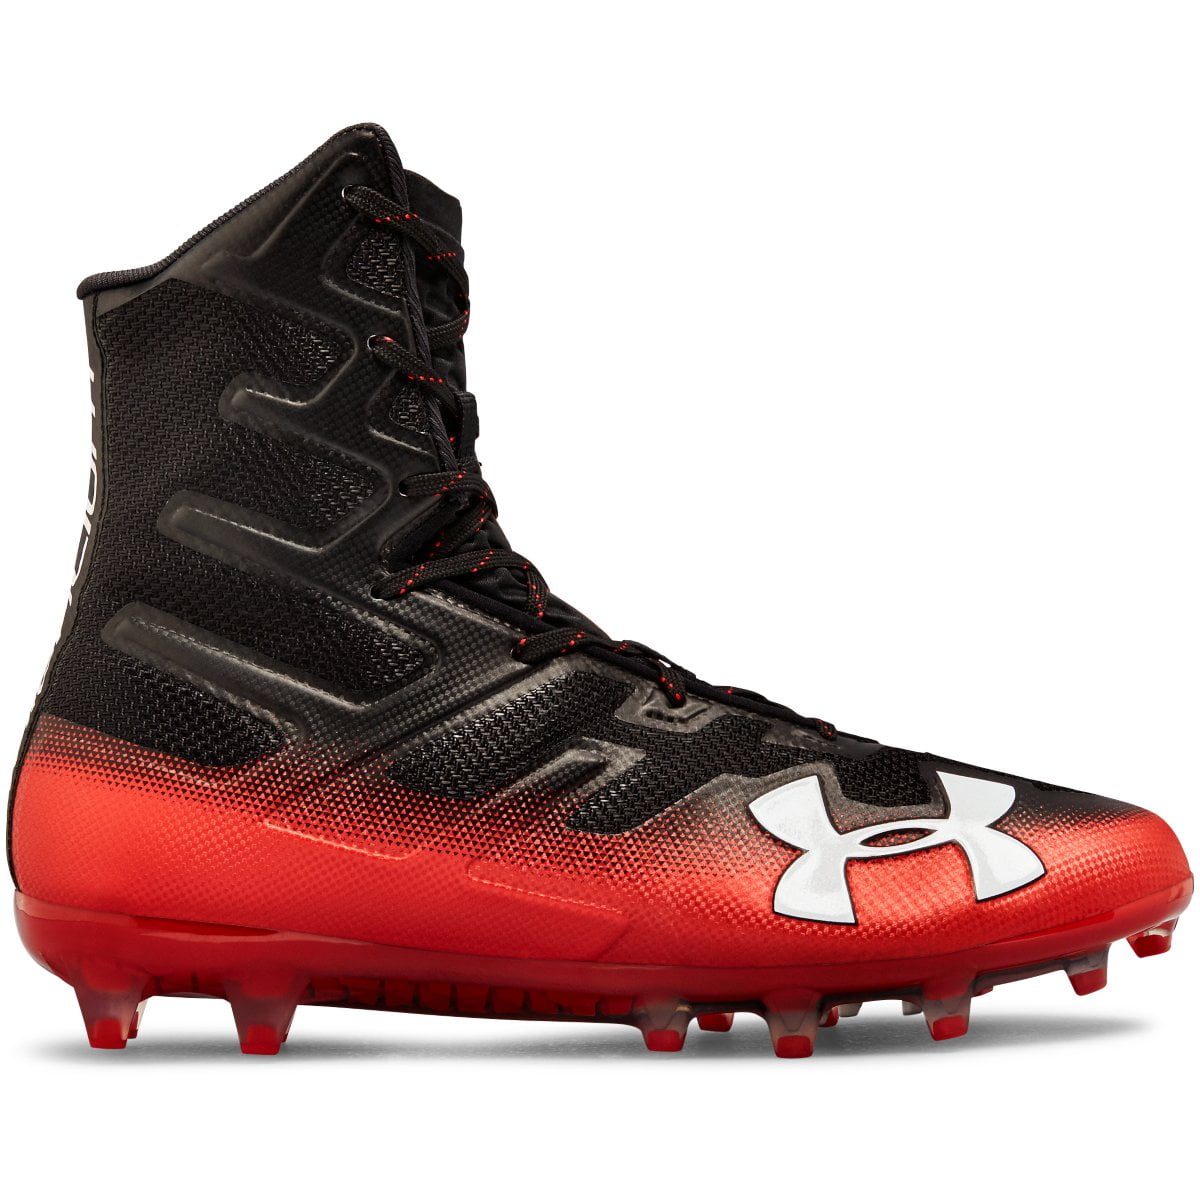 NEW Mens Under Armour Blur Football Cleats Texas Tech Black/Red-Pick Size 